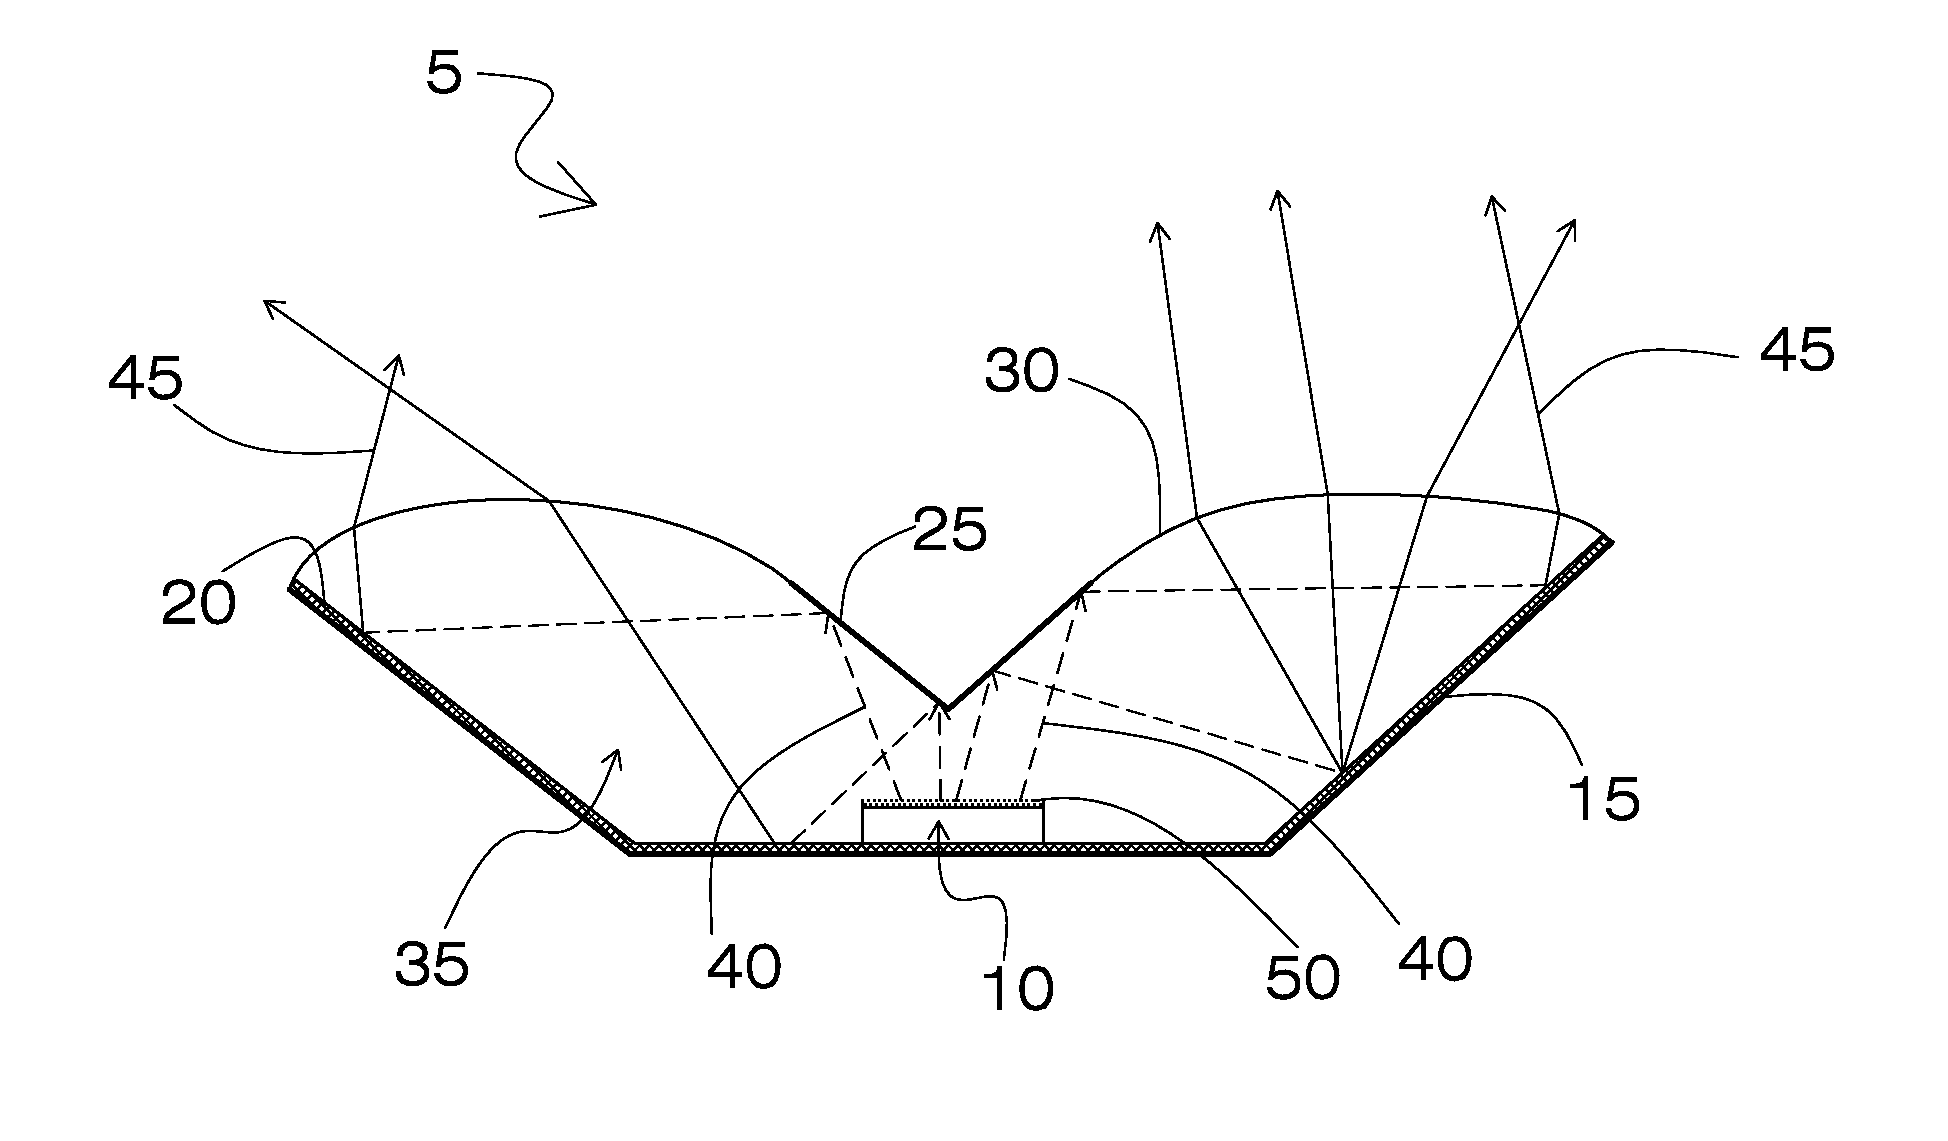 Semiconductor lighting device with reflective remote wavelength conversion